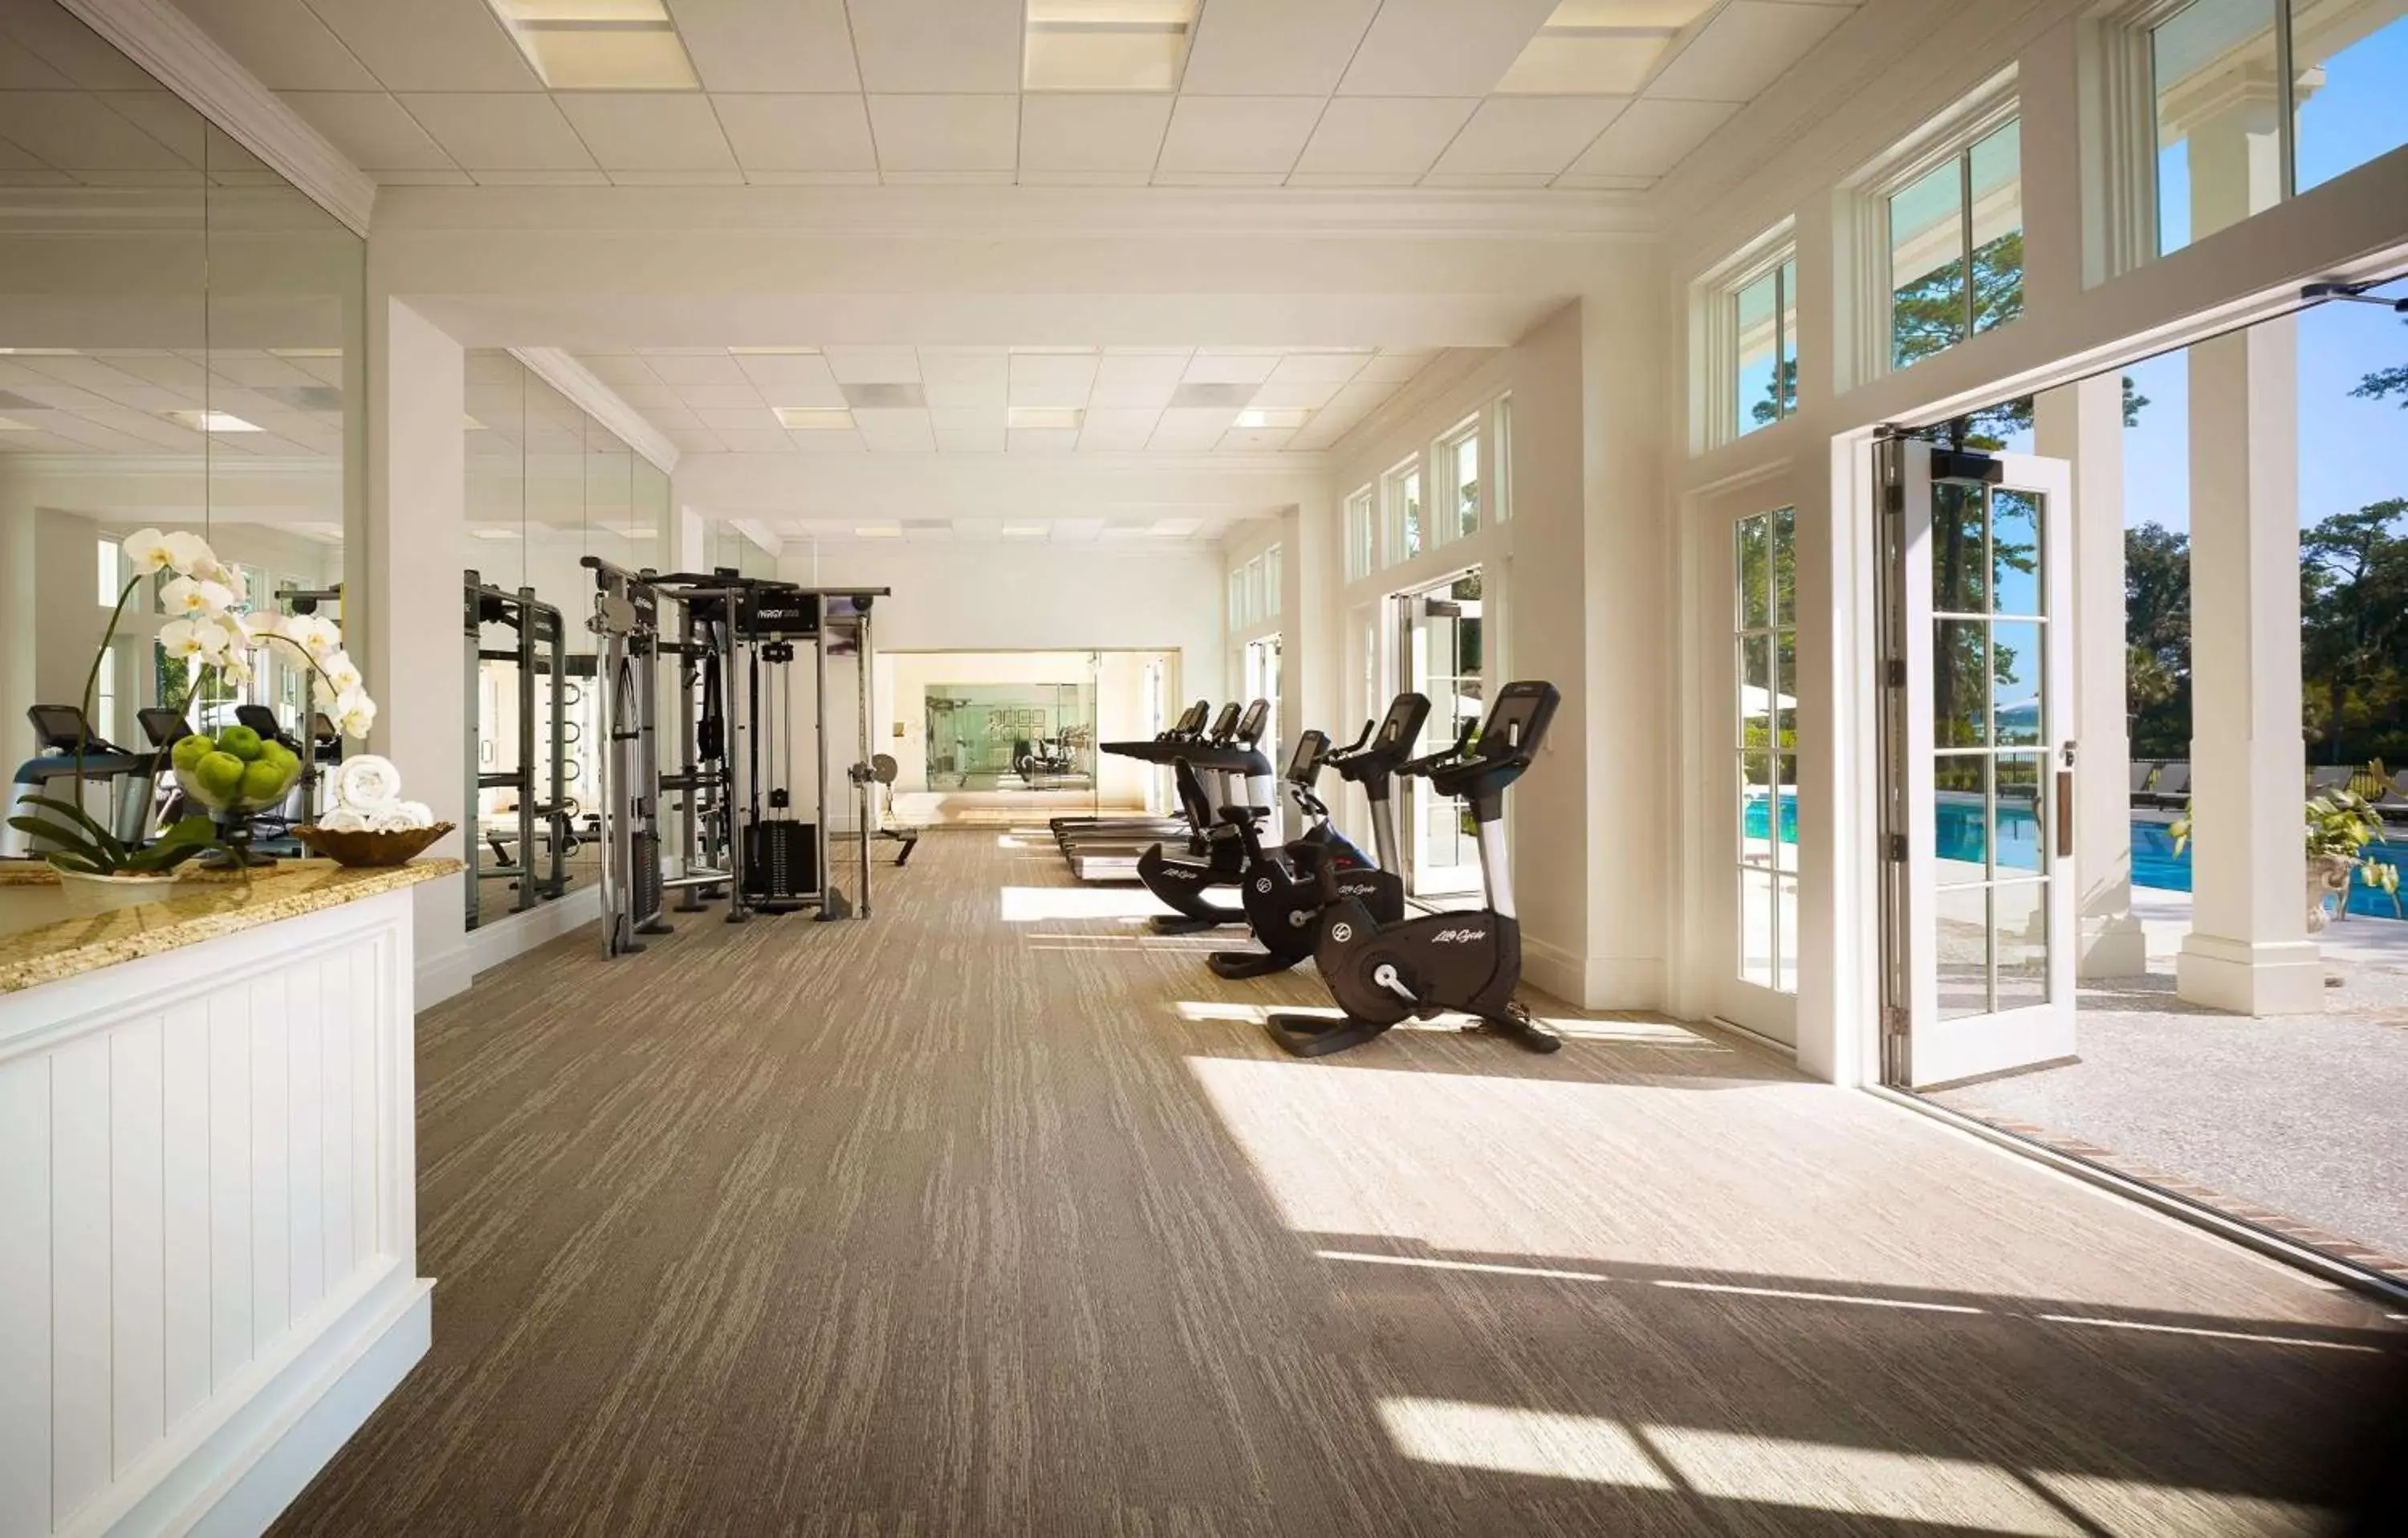 On site, Fitness Center/Facilities in Montage Palmetto Bluff